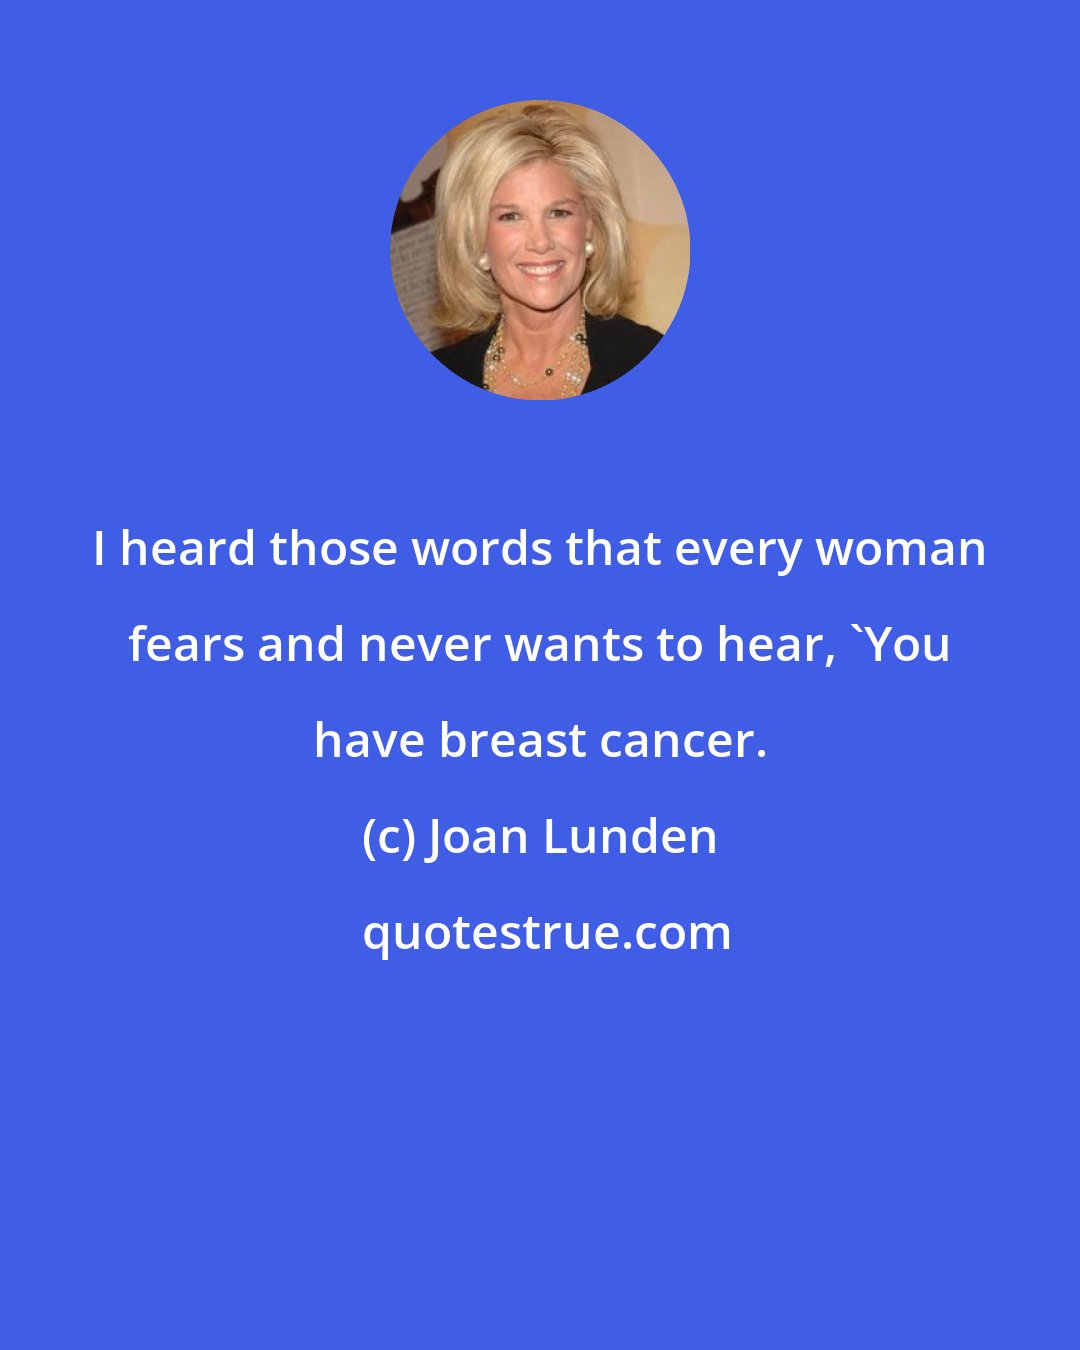 Joan Lunden: I heard those words that every woman fears and never wants to hear, 'You have breast cancer.